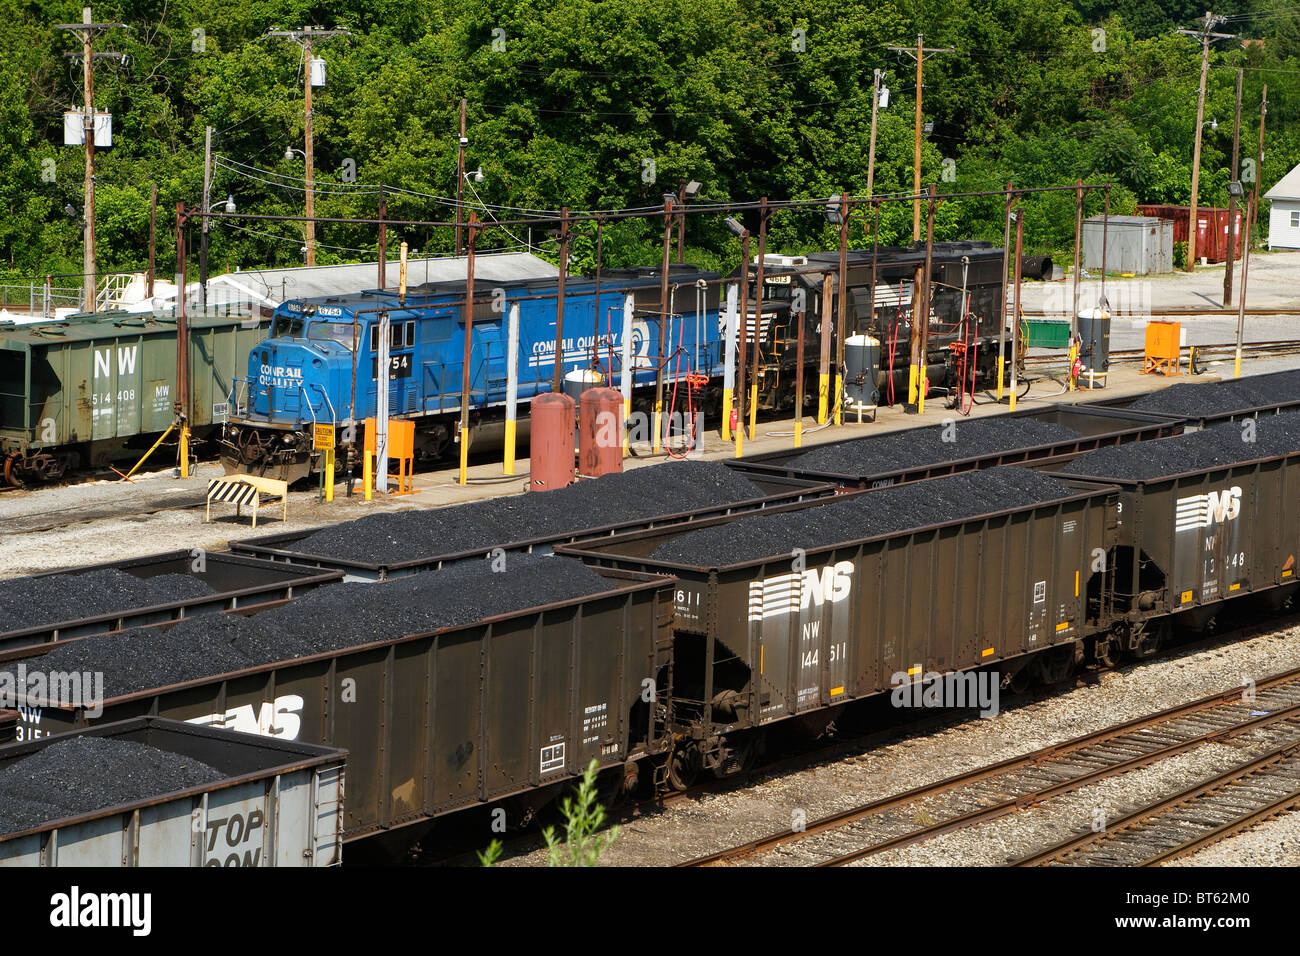 2 Norfolk Southern owned locomotives at a railroad yard fueling station in Dickinson, WV. Coal cars dominate the foreground. Stock Photo